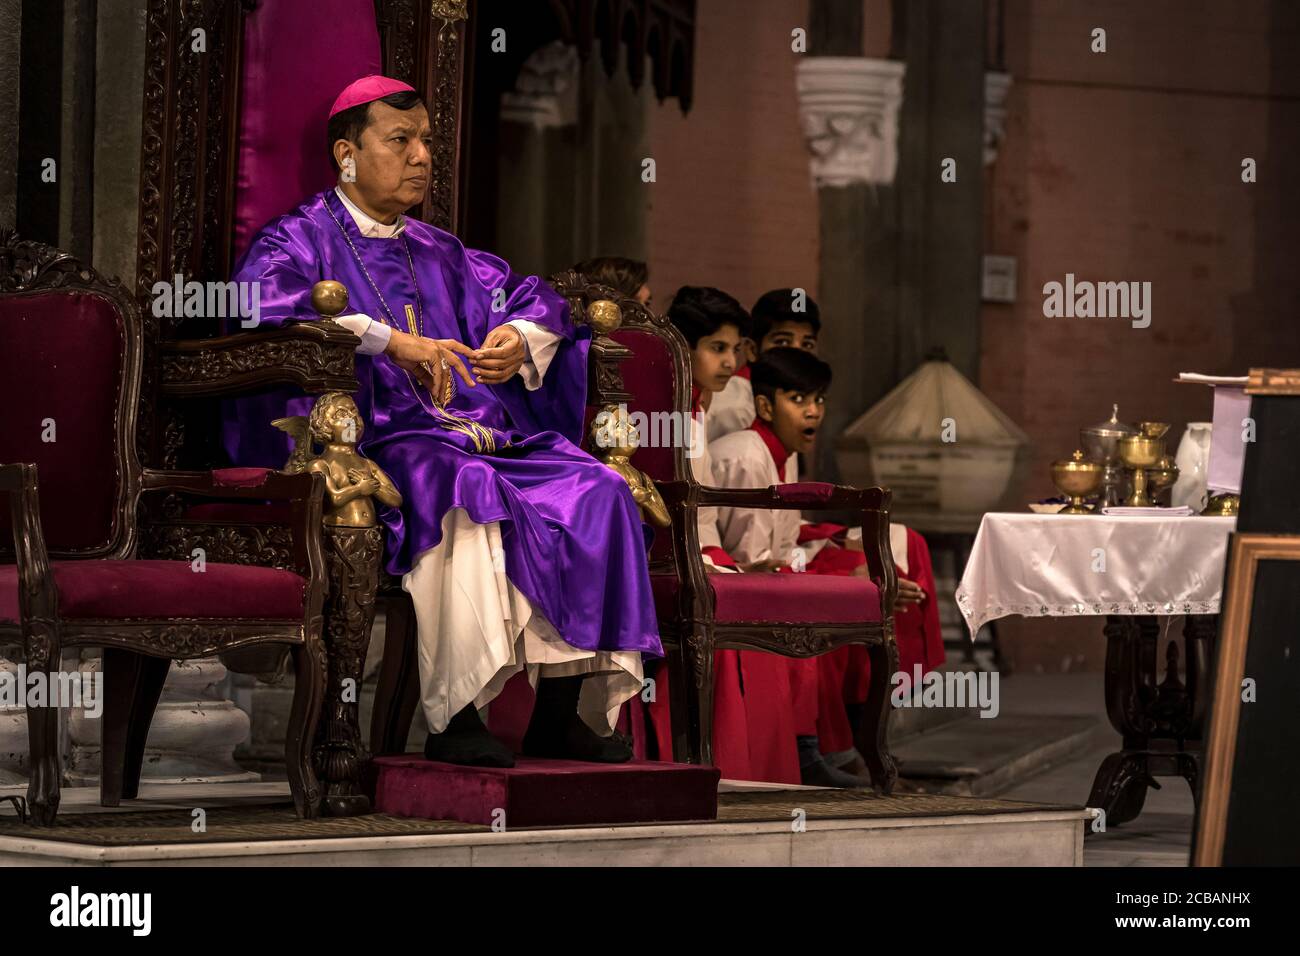 The bishop of Lahore, Sebastian Francis Shah while the Sunday service in the Sacred Heart Cathedral in Lahore in Pakistan. In 2015, the parish was attacked in the cathedral during a bomb attack where numerous victims were reported. Stock Photo